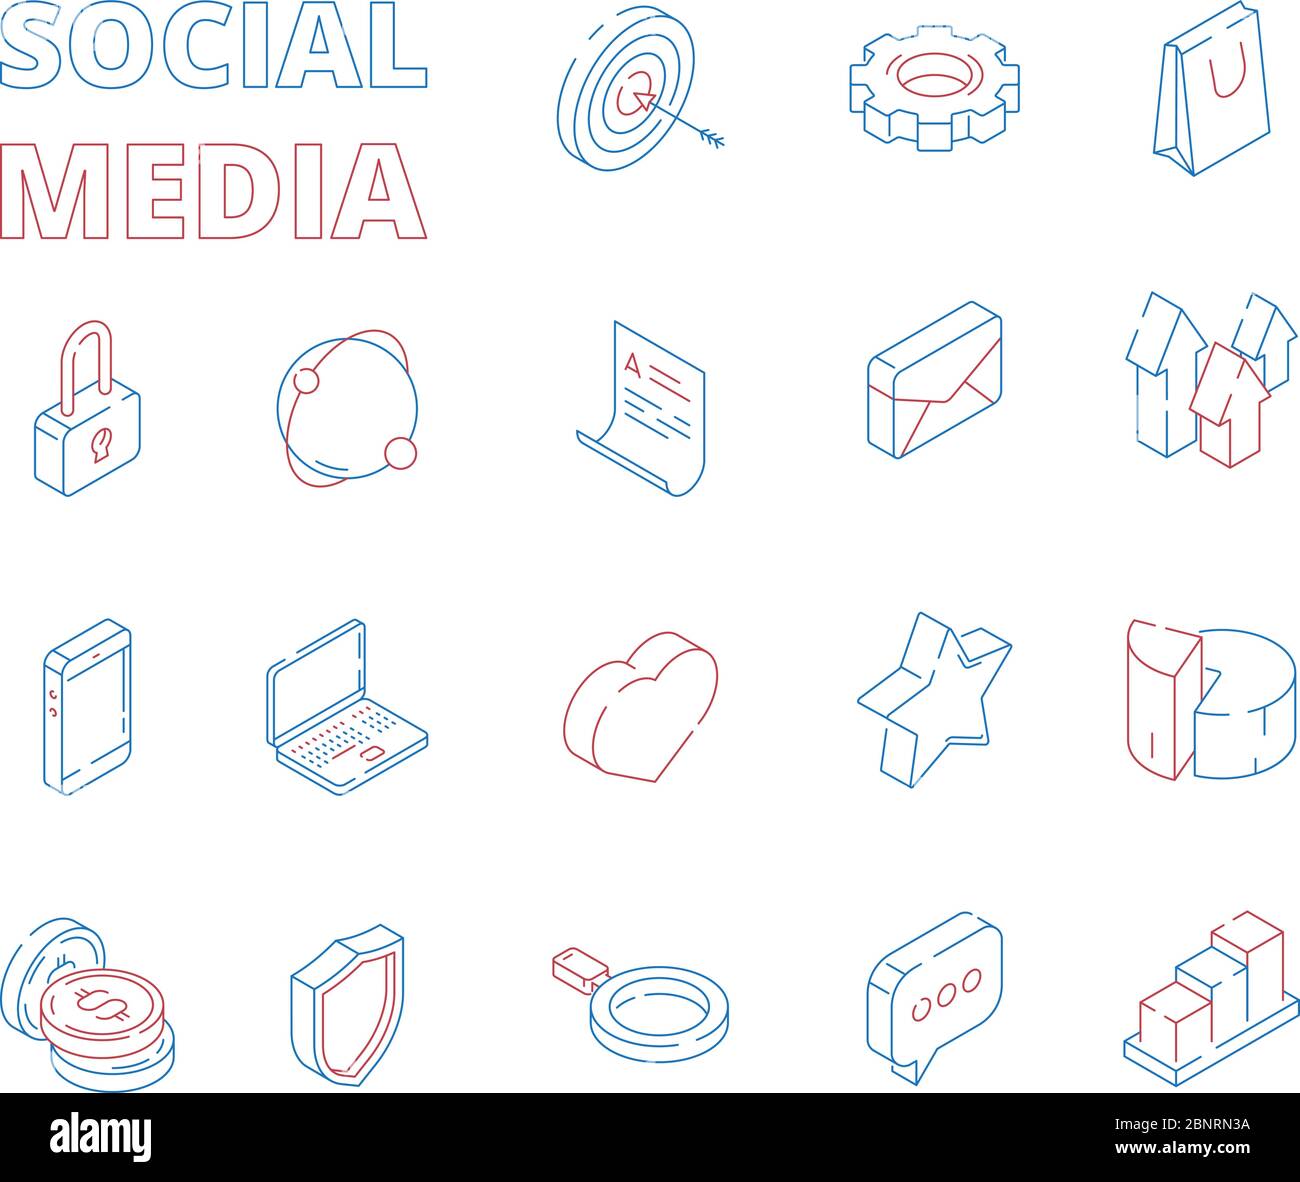 Marketing isometric icon. Web social media network symbols digital set mail graphs likes hearts news message thin line vector pictures Stock Vector